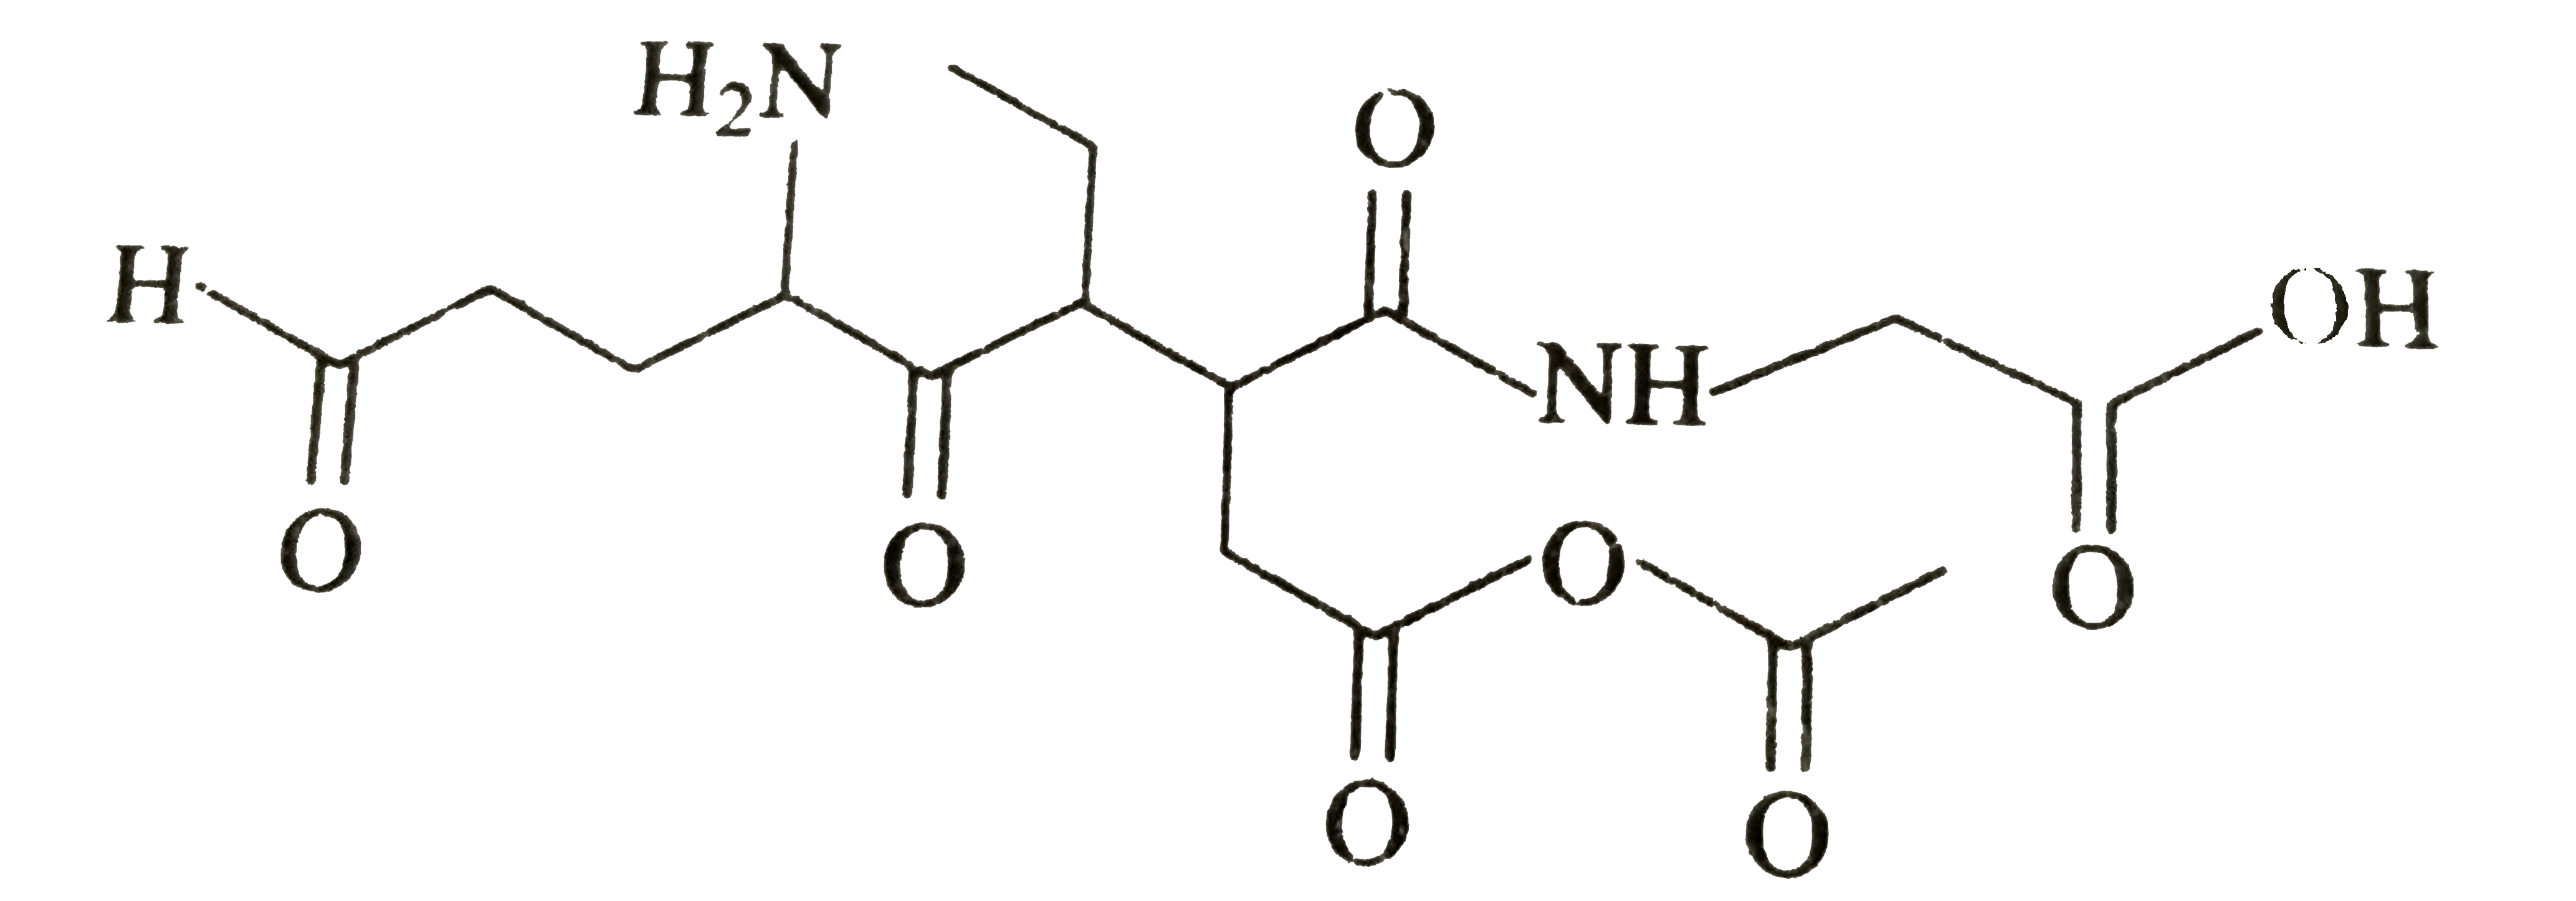 Numbetr of functional groups present in the following compound is :